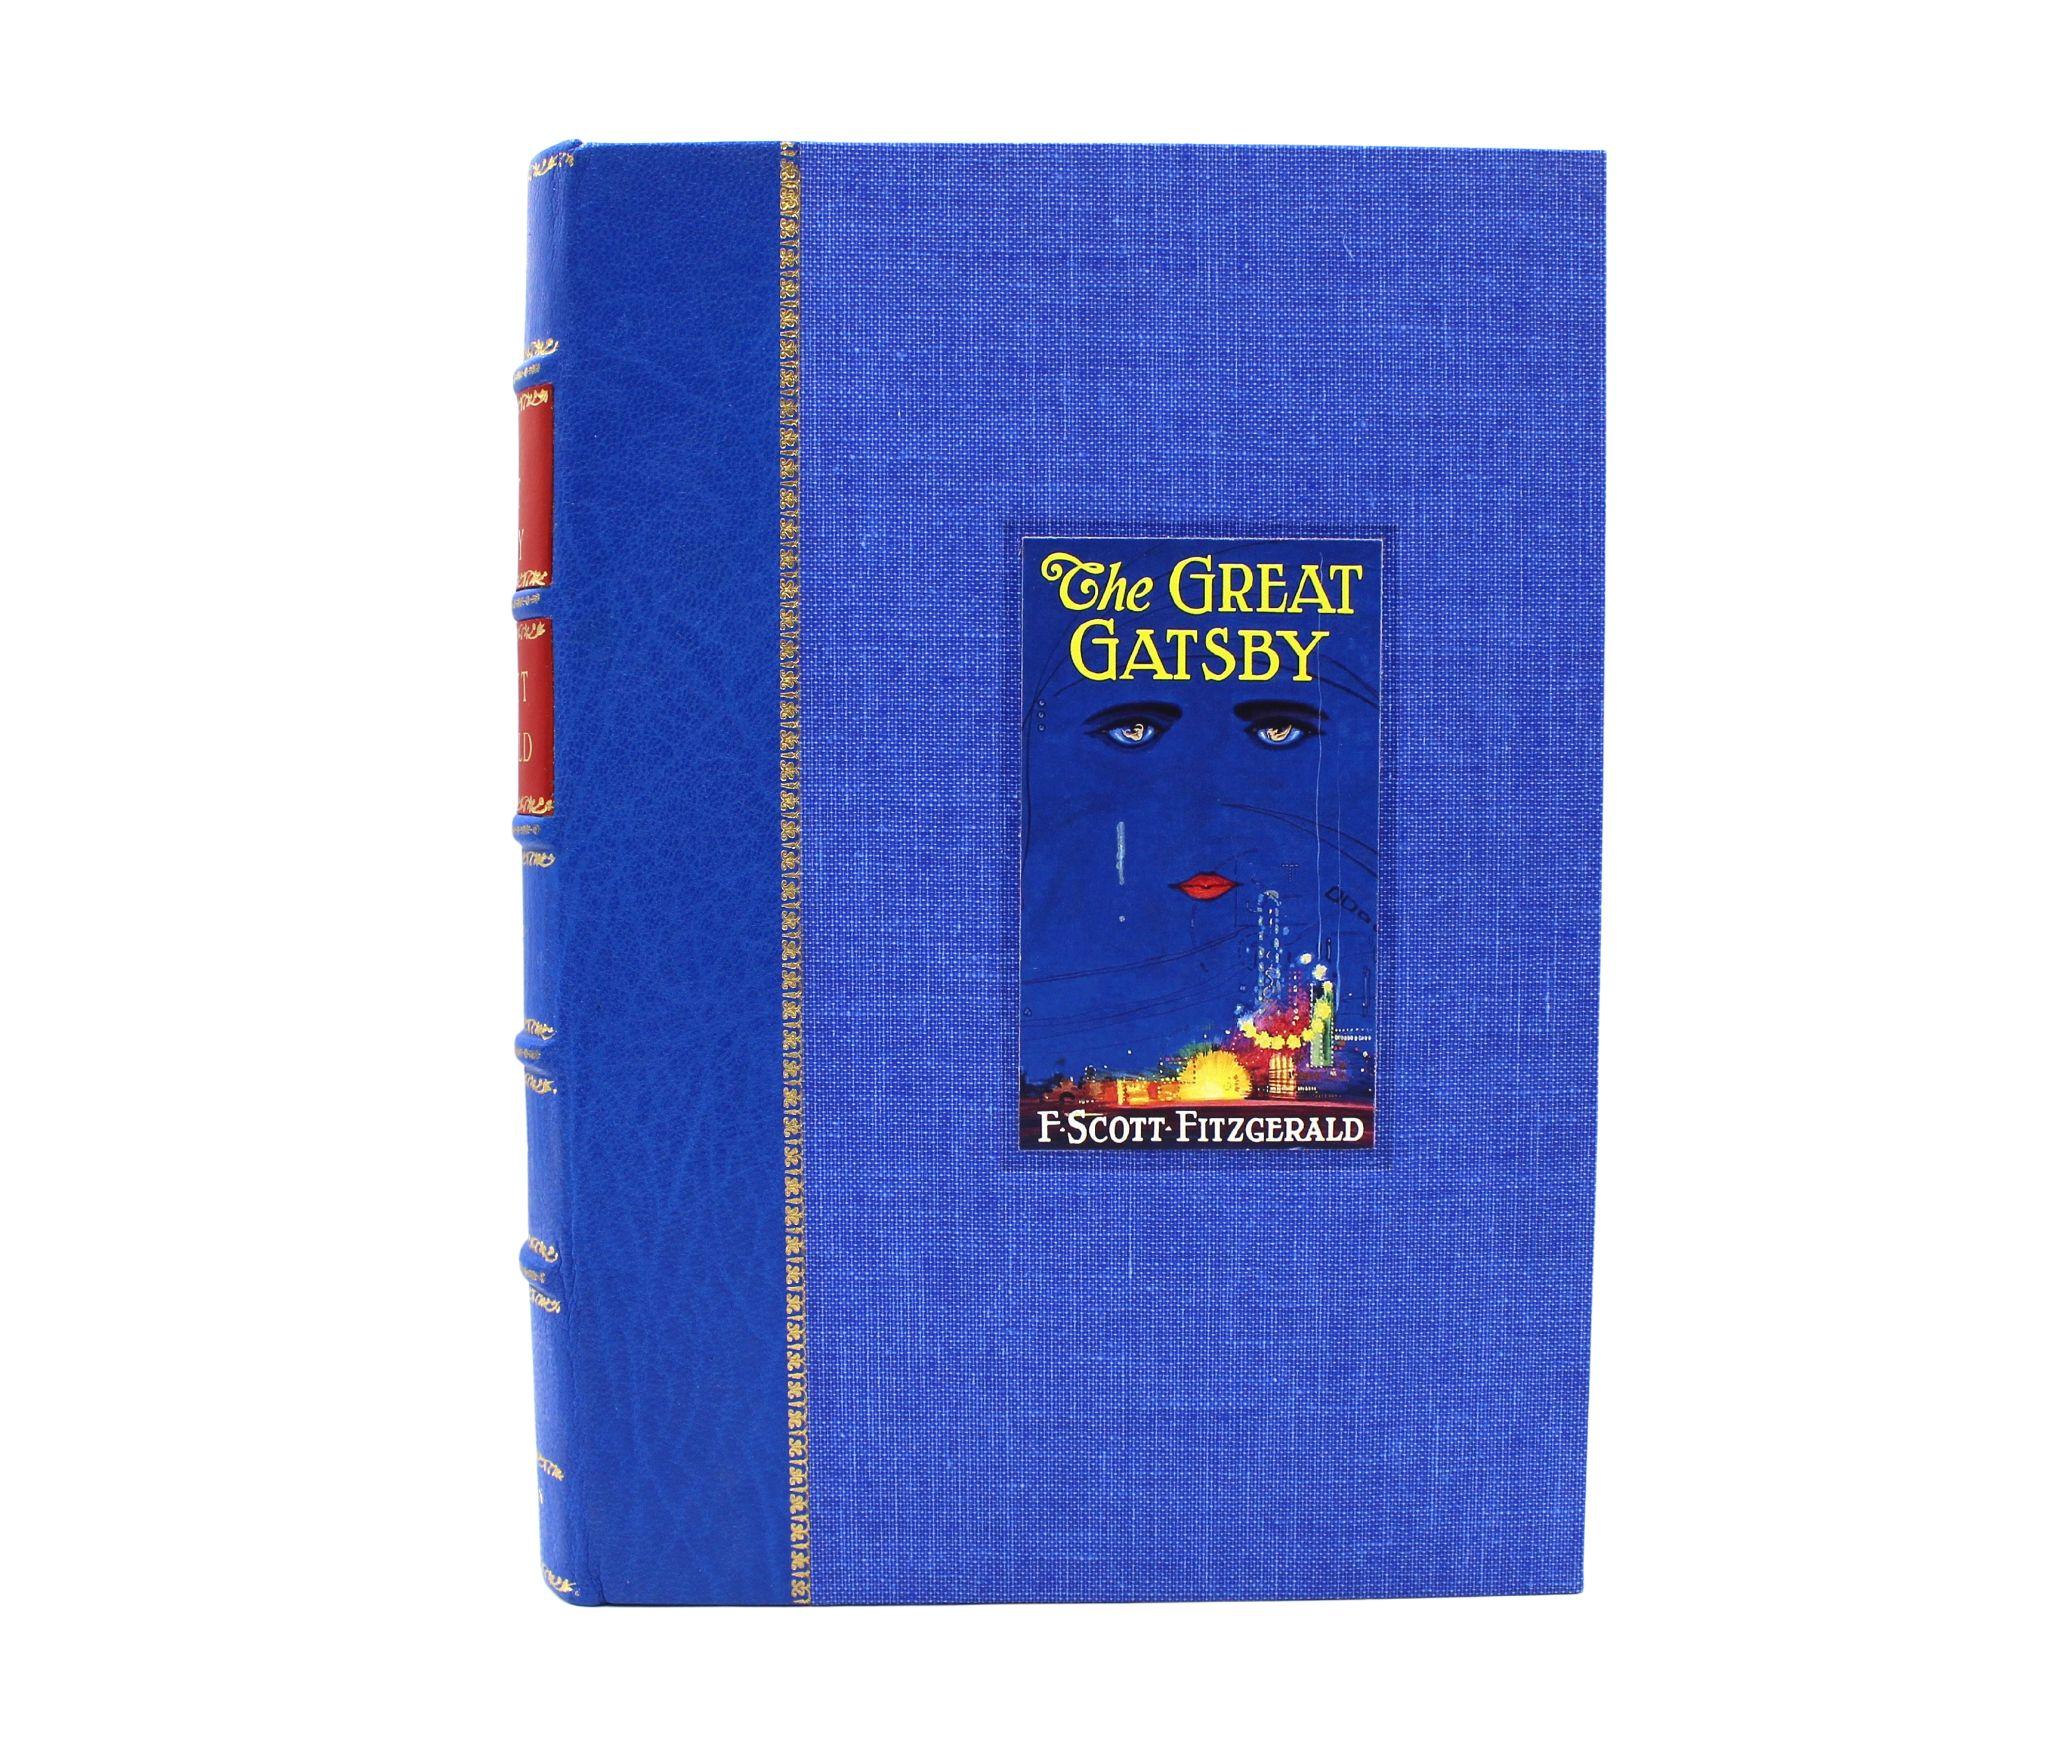 The Great Gatsby by F. Scott Fitzgerald, First Edition, First Issue, 1925 For Sale 6